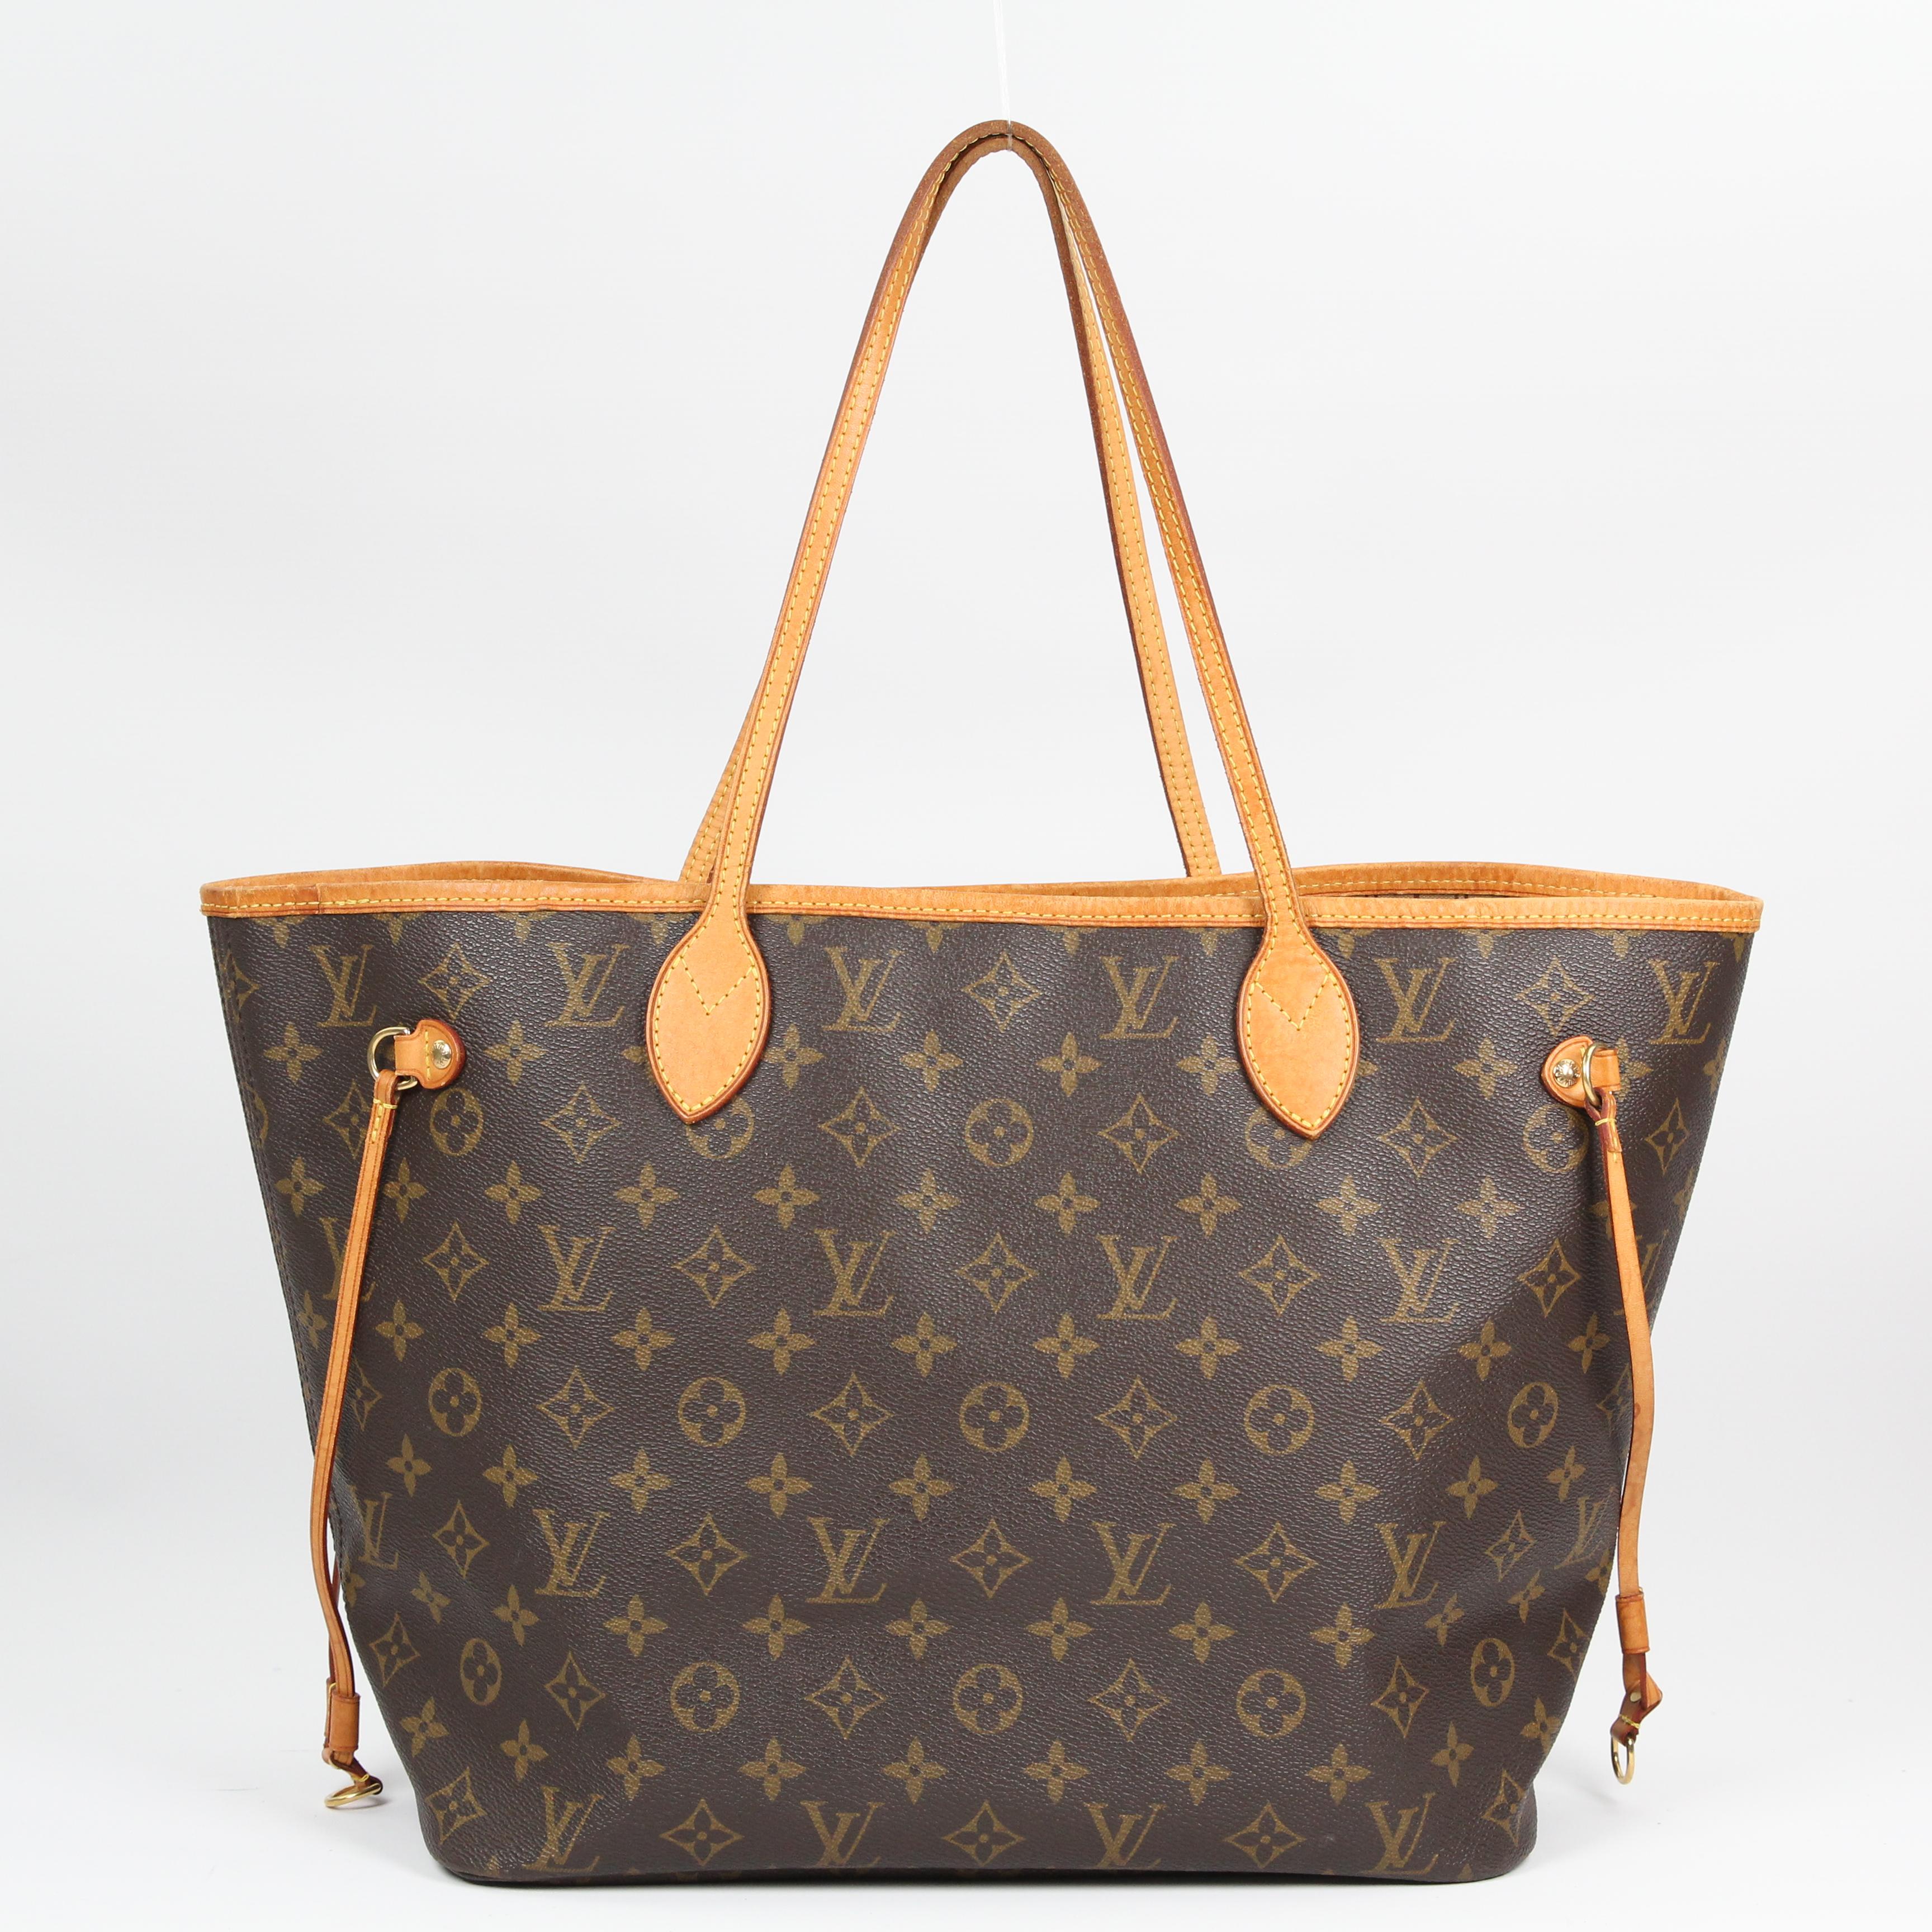 Louis Vuitton Neverfull leather tote For Sale 7